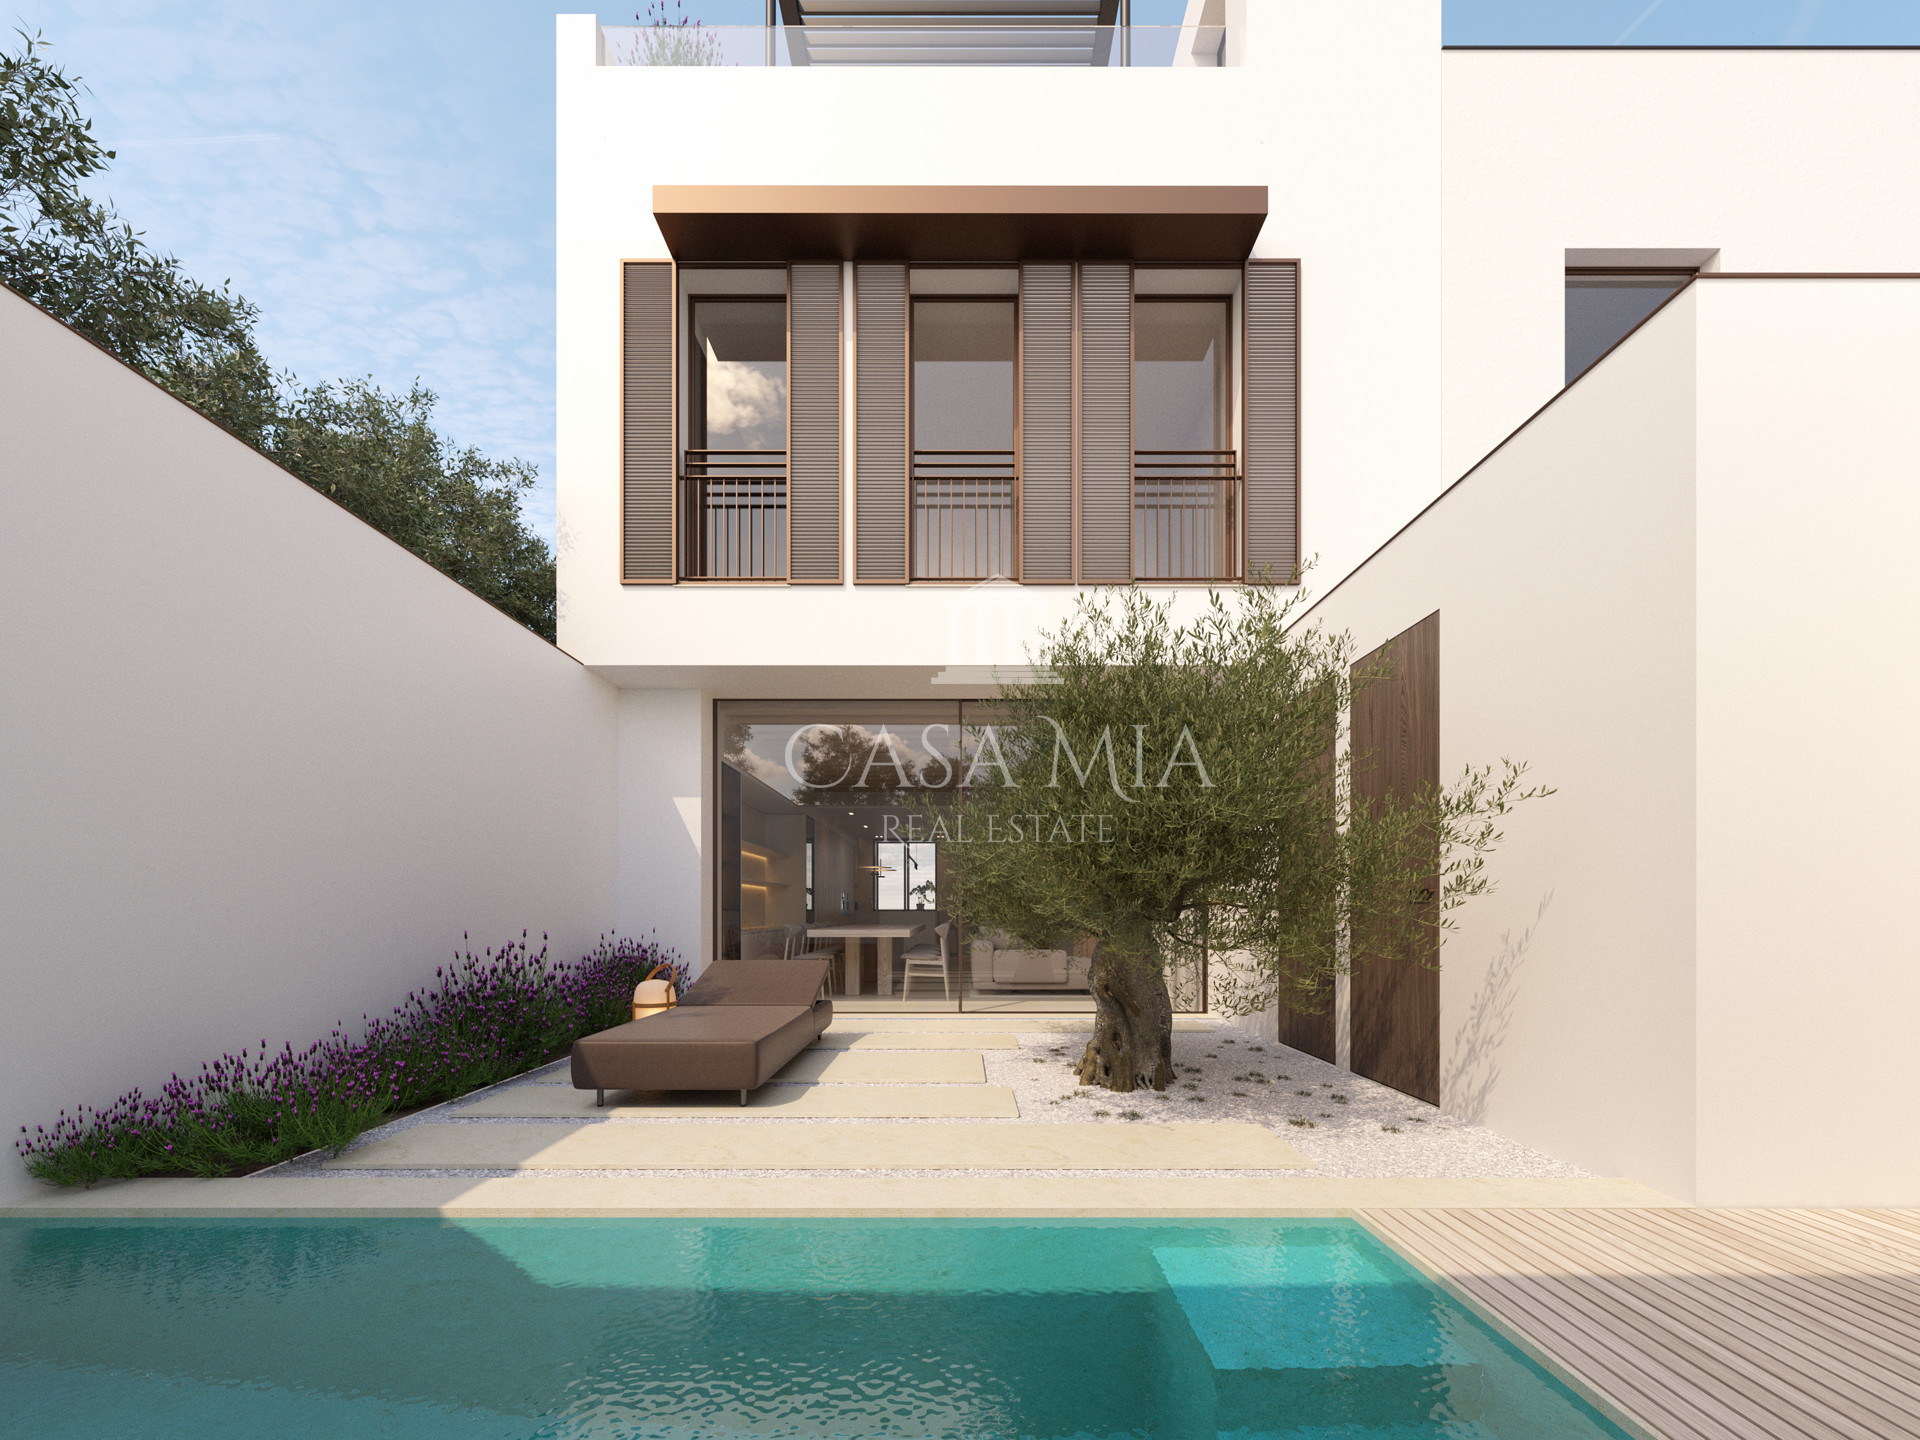 Project - Townhouse in one of the most desirable areas of the island, Molinar